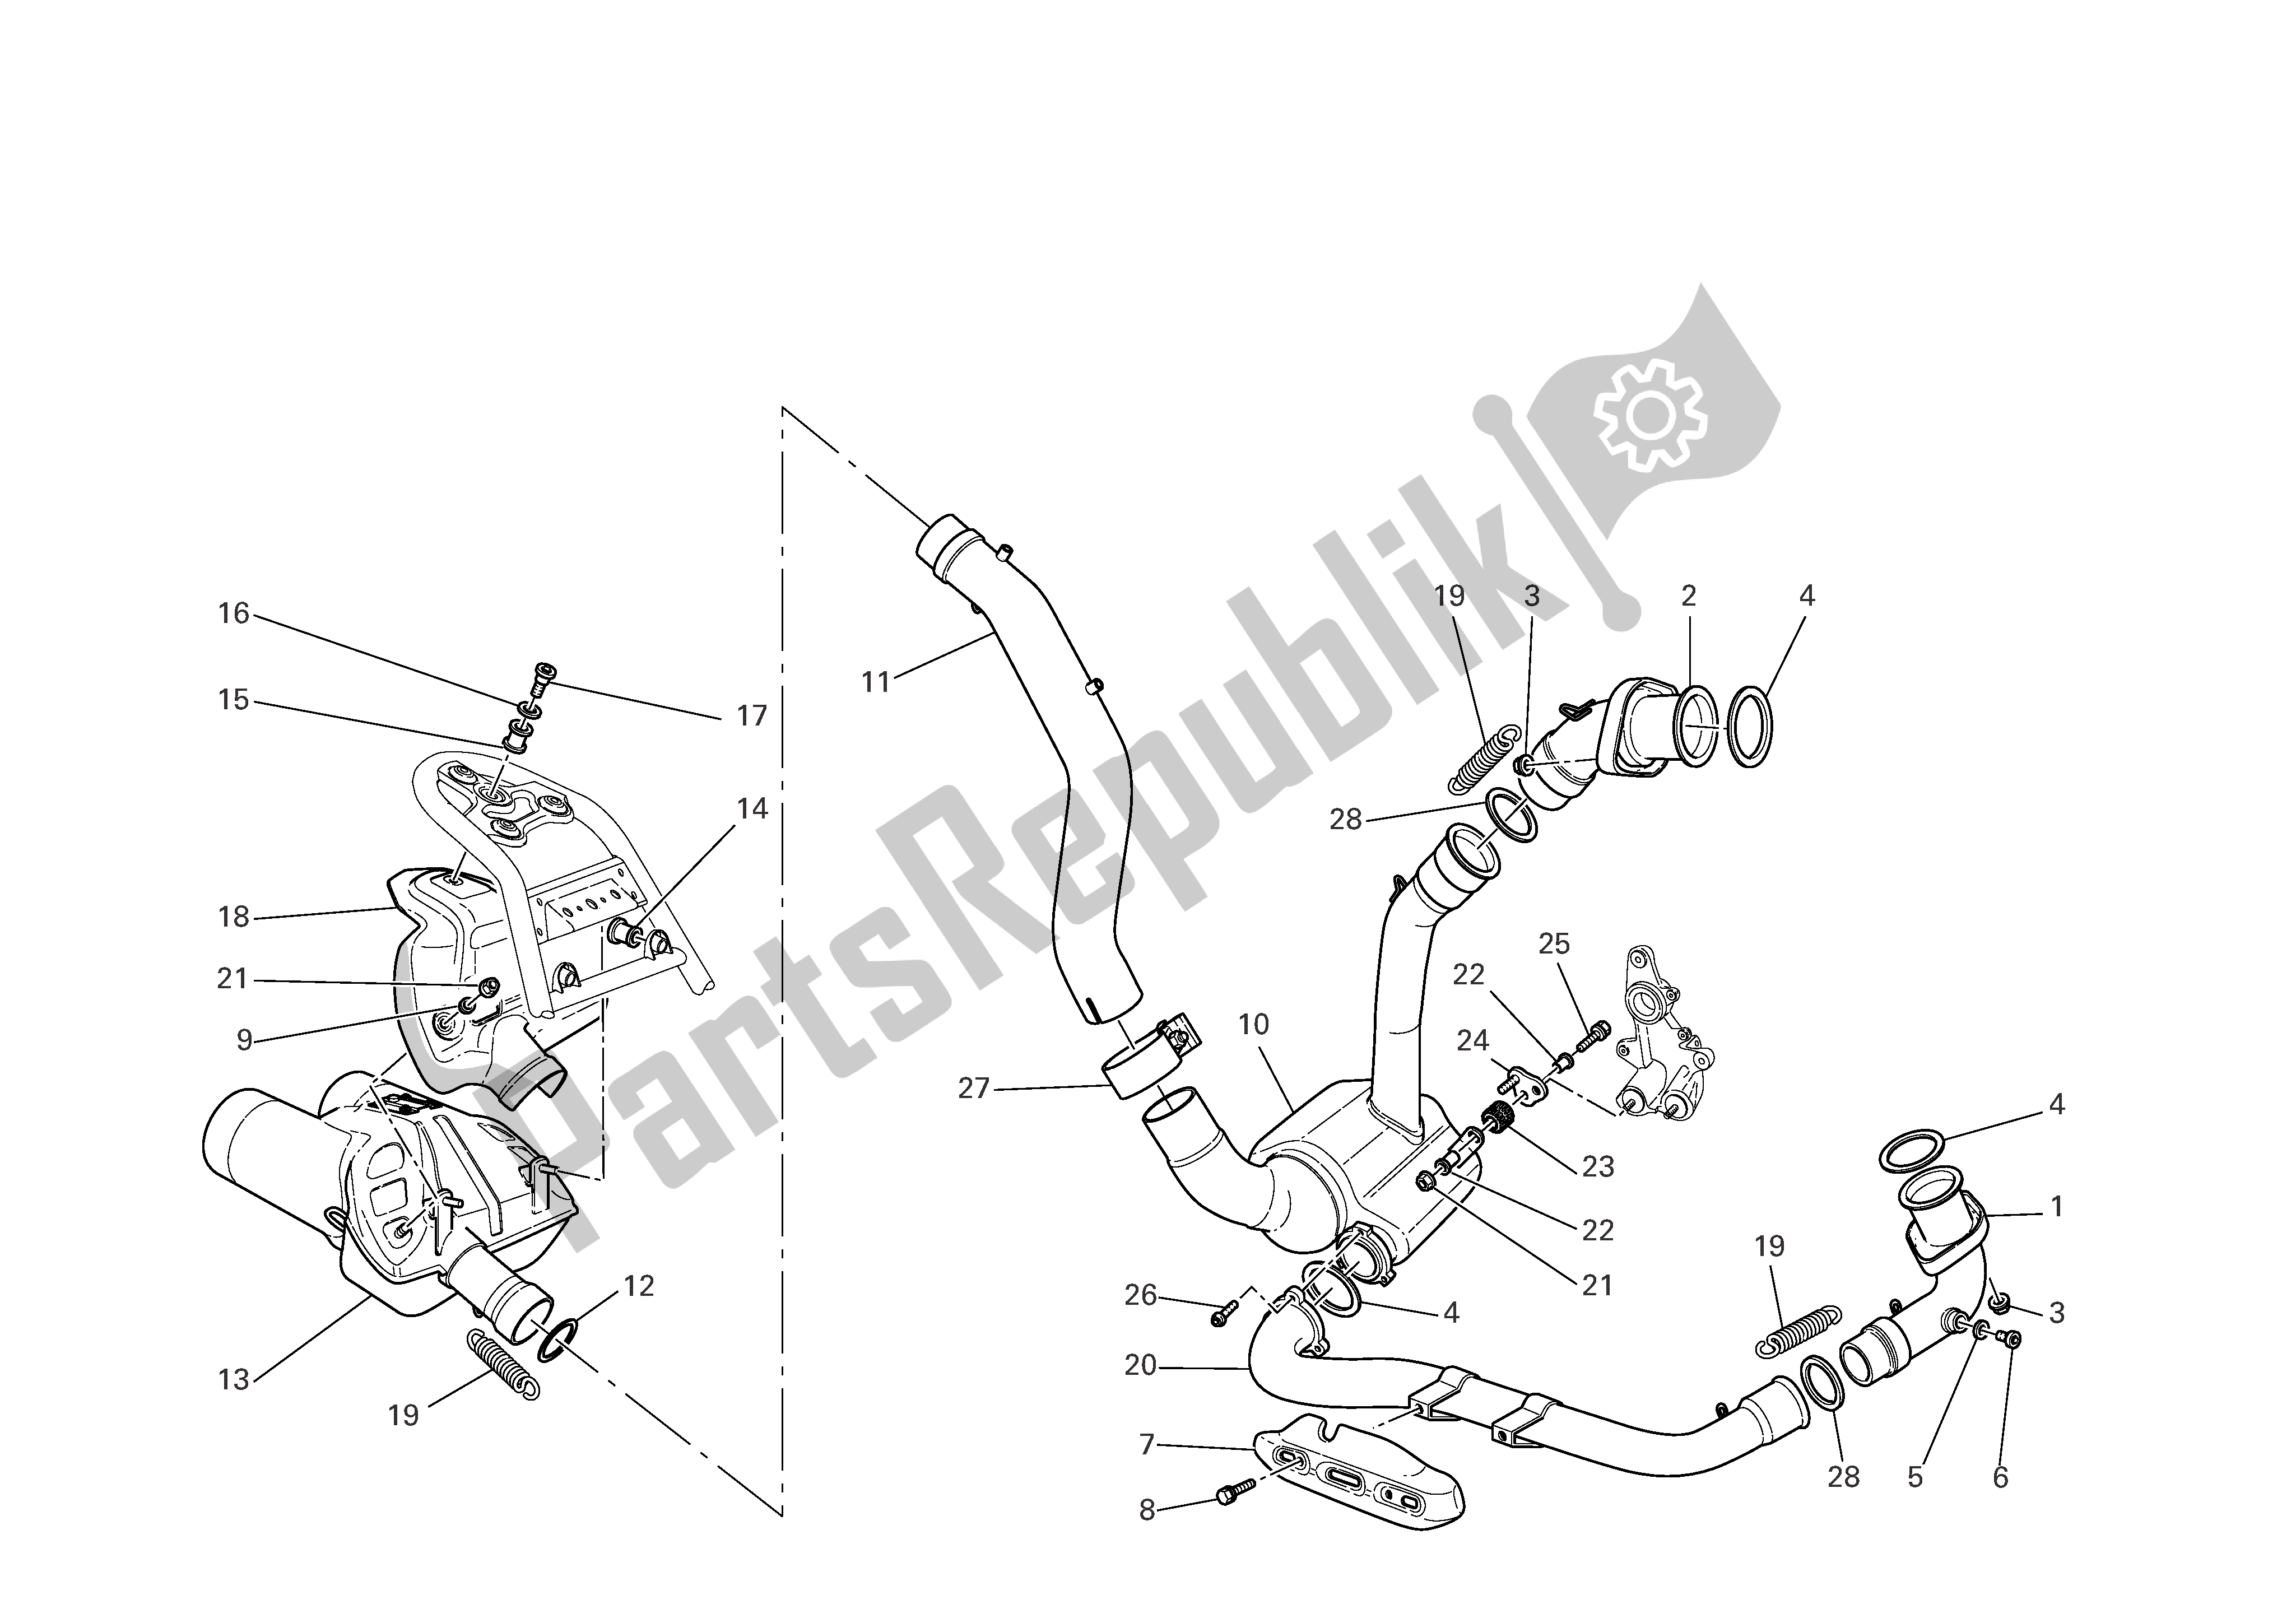 All parts for the Exhaust System of the Ducati Multistrada 1000 2005